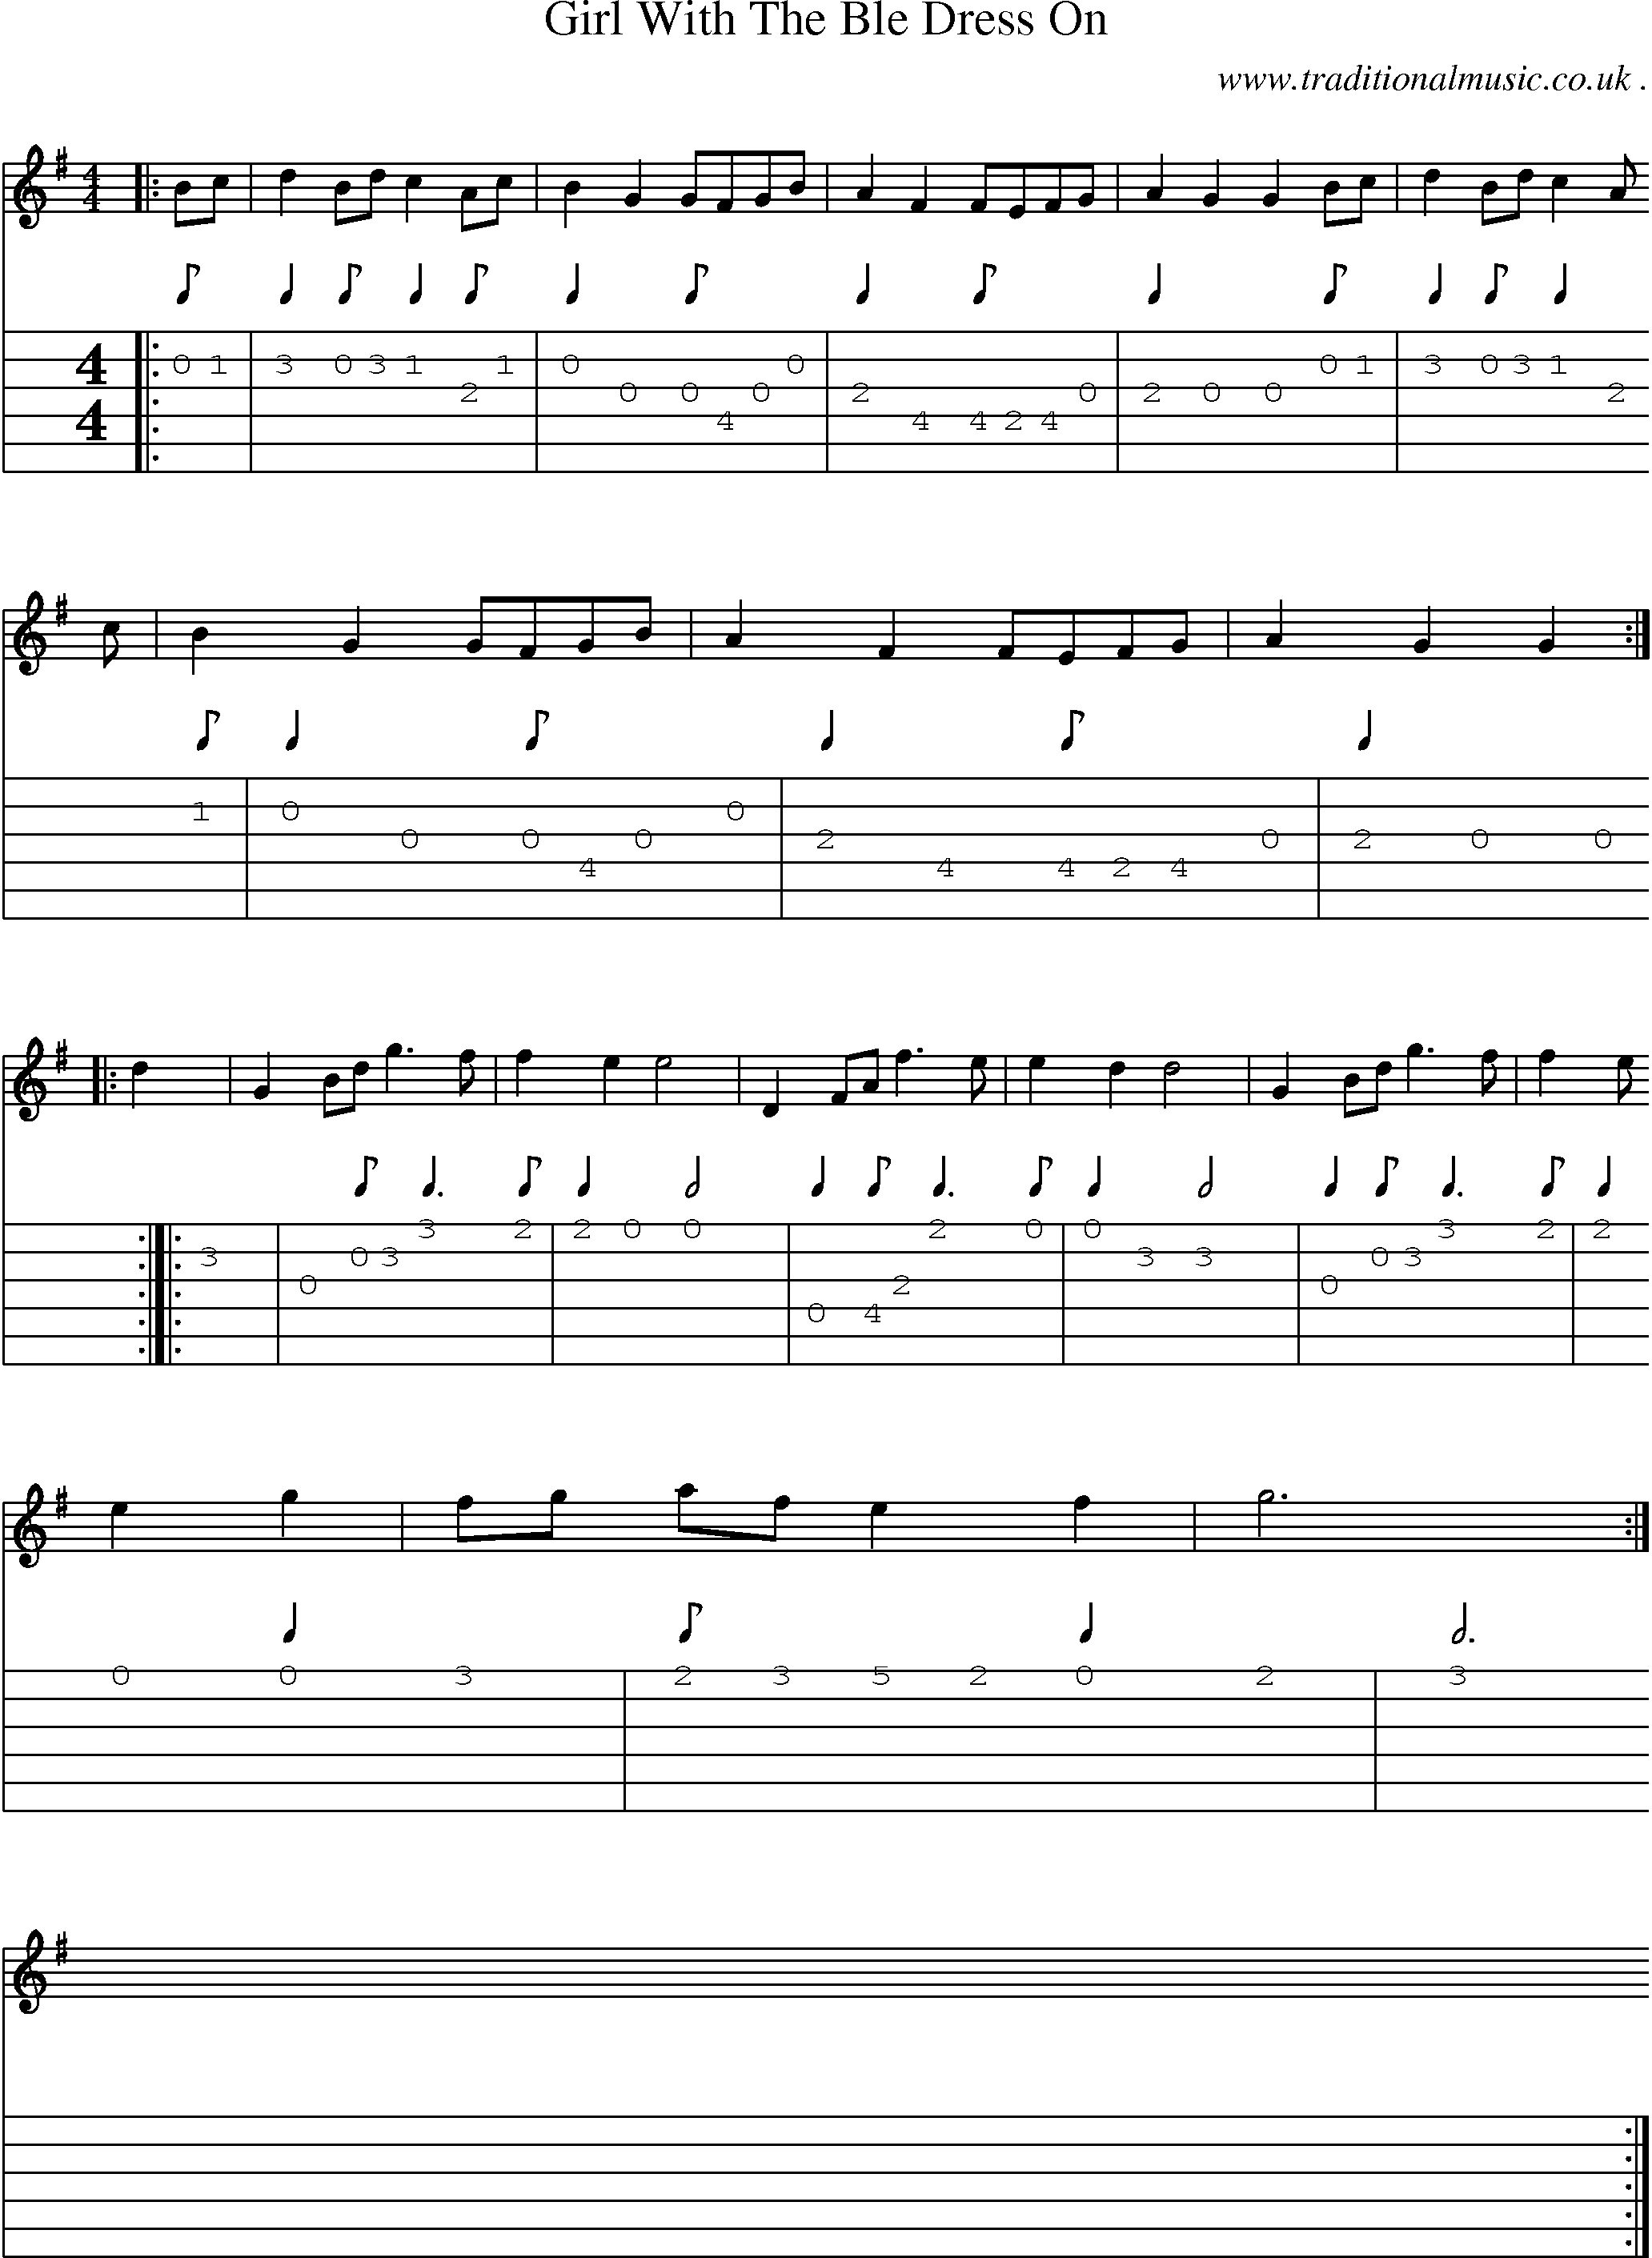 Sheet-Music and Guitar Tabs for Girl With The Ble Dress On